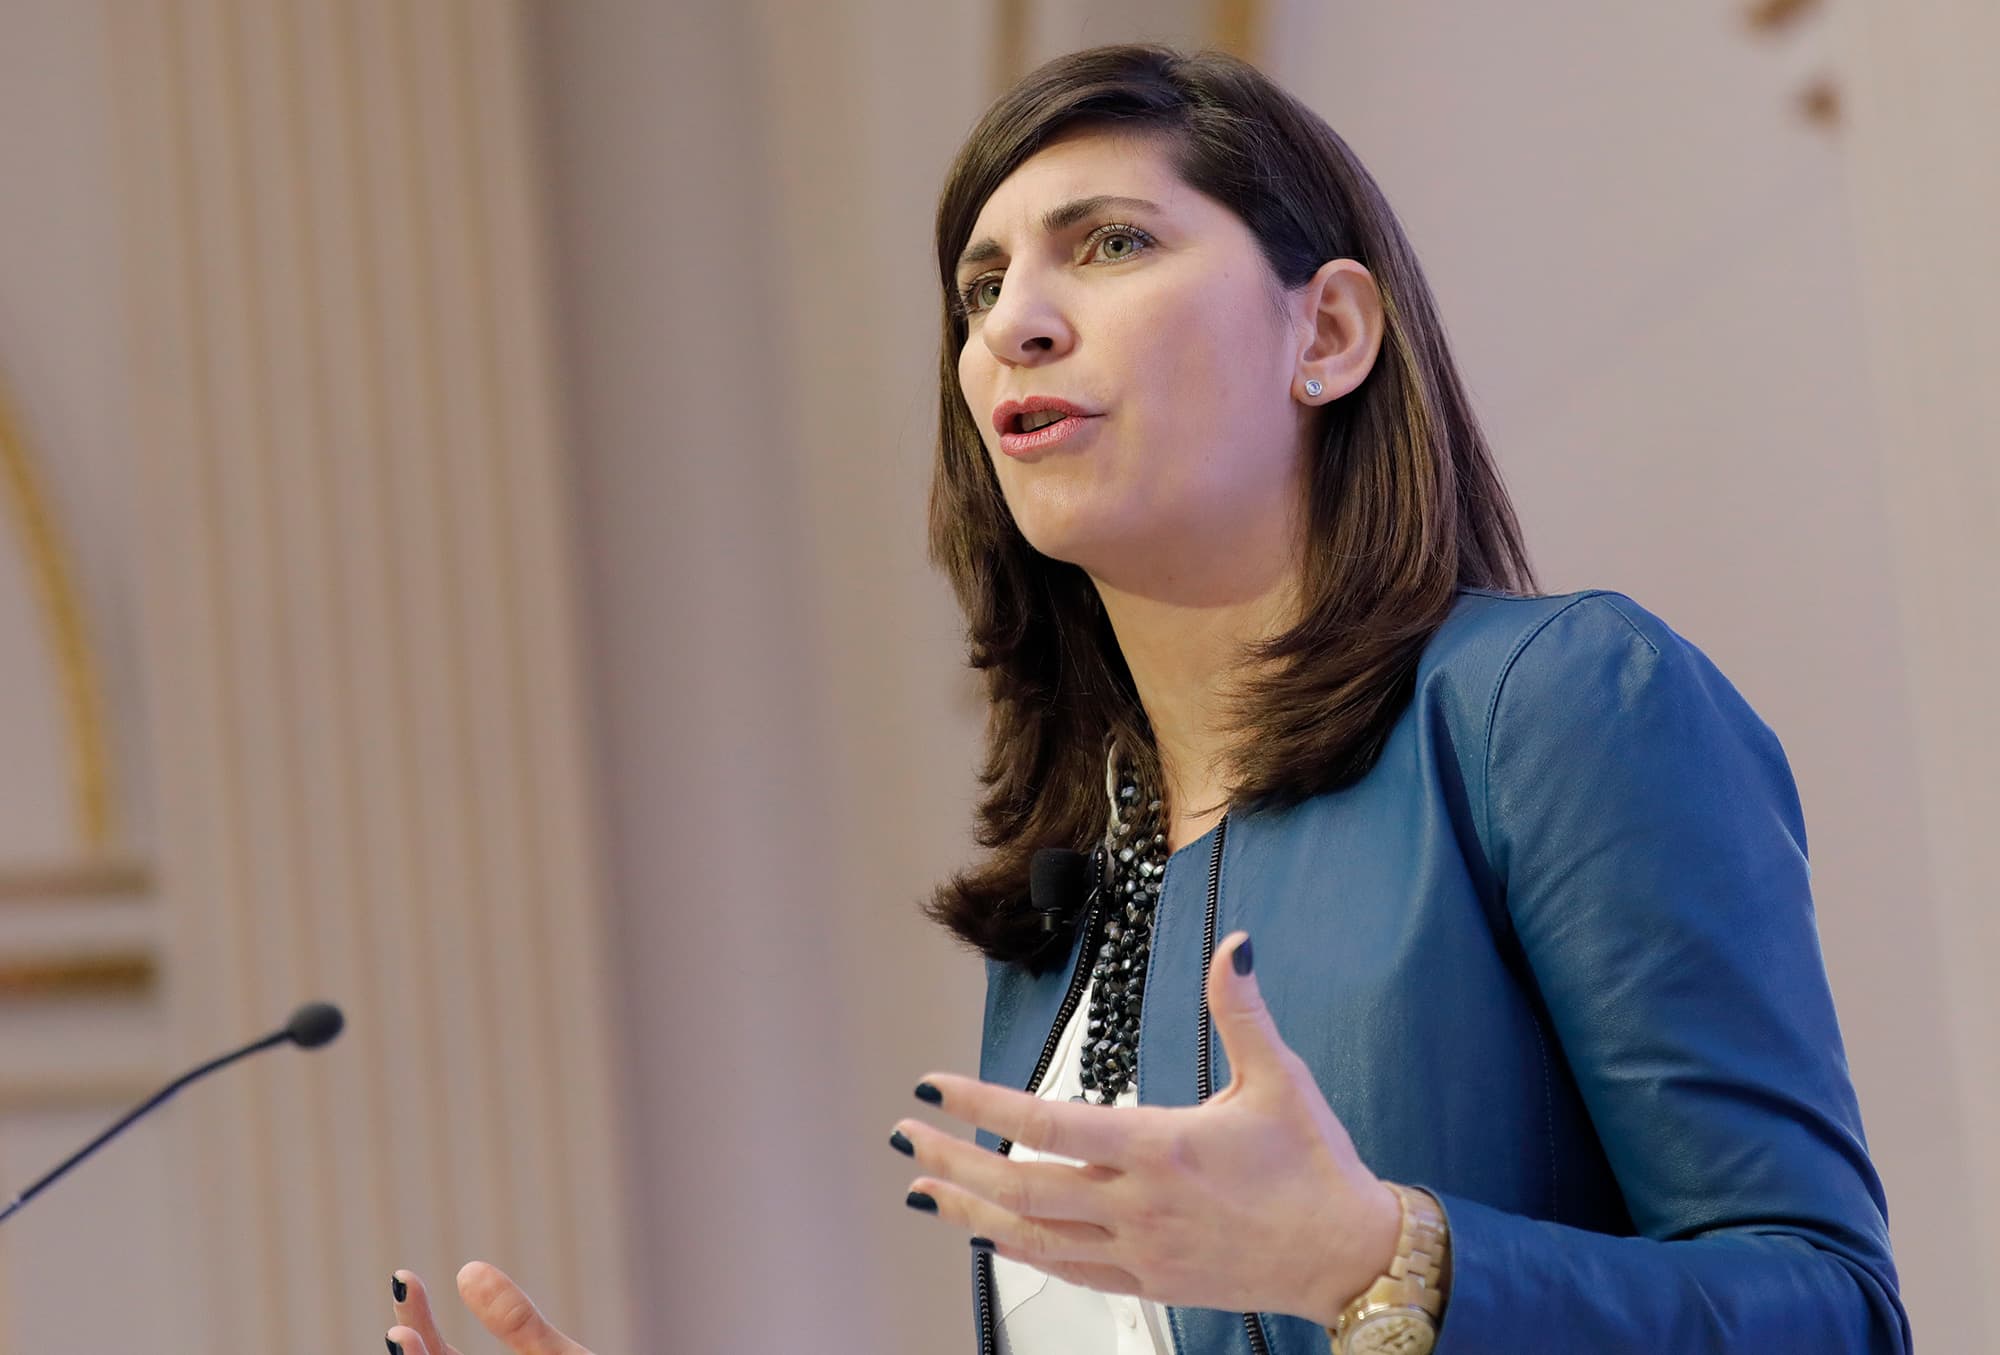 The NYSE shakes up top management with Lynn Martin replacing Stacey Cunningham as president